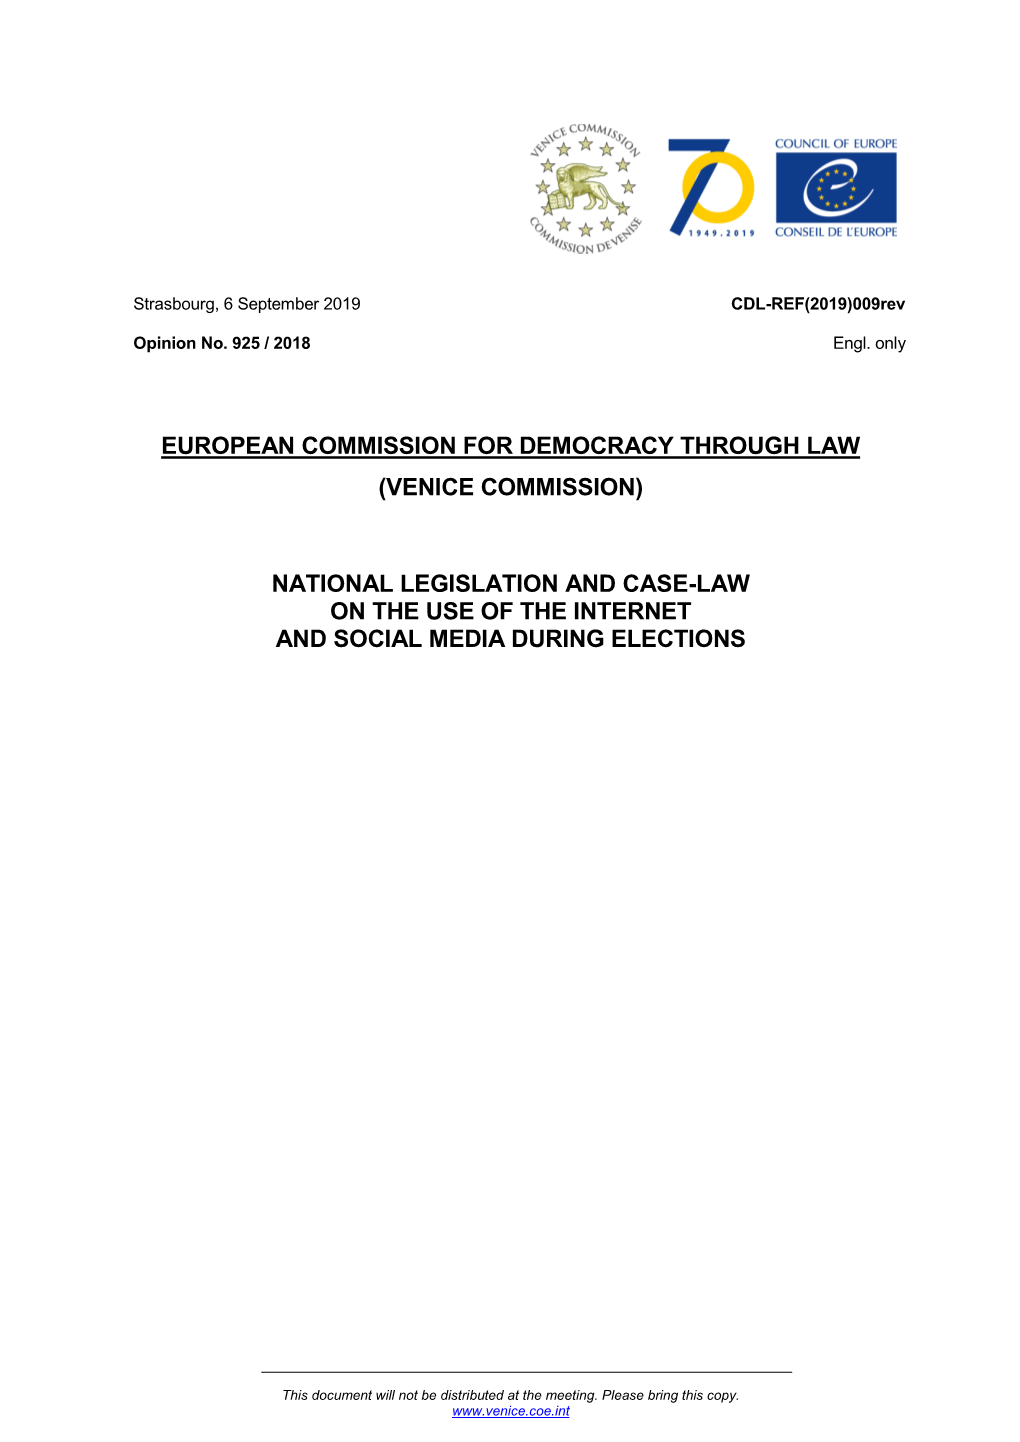 (Venice Commission) National Legislation and Case-Law On